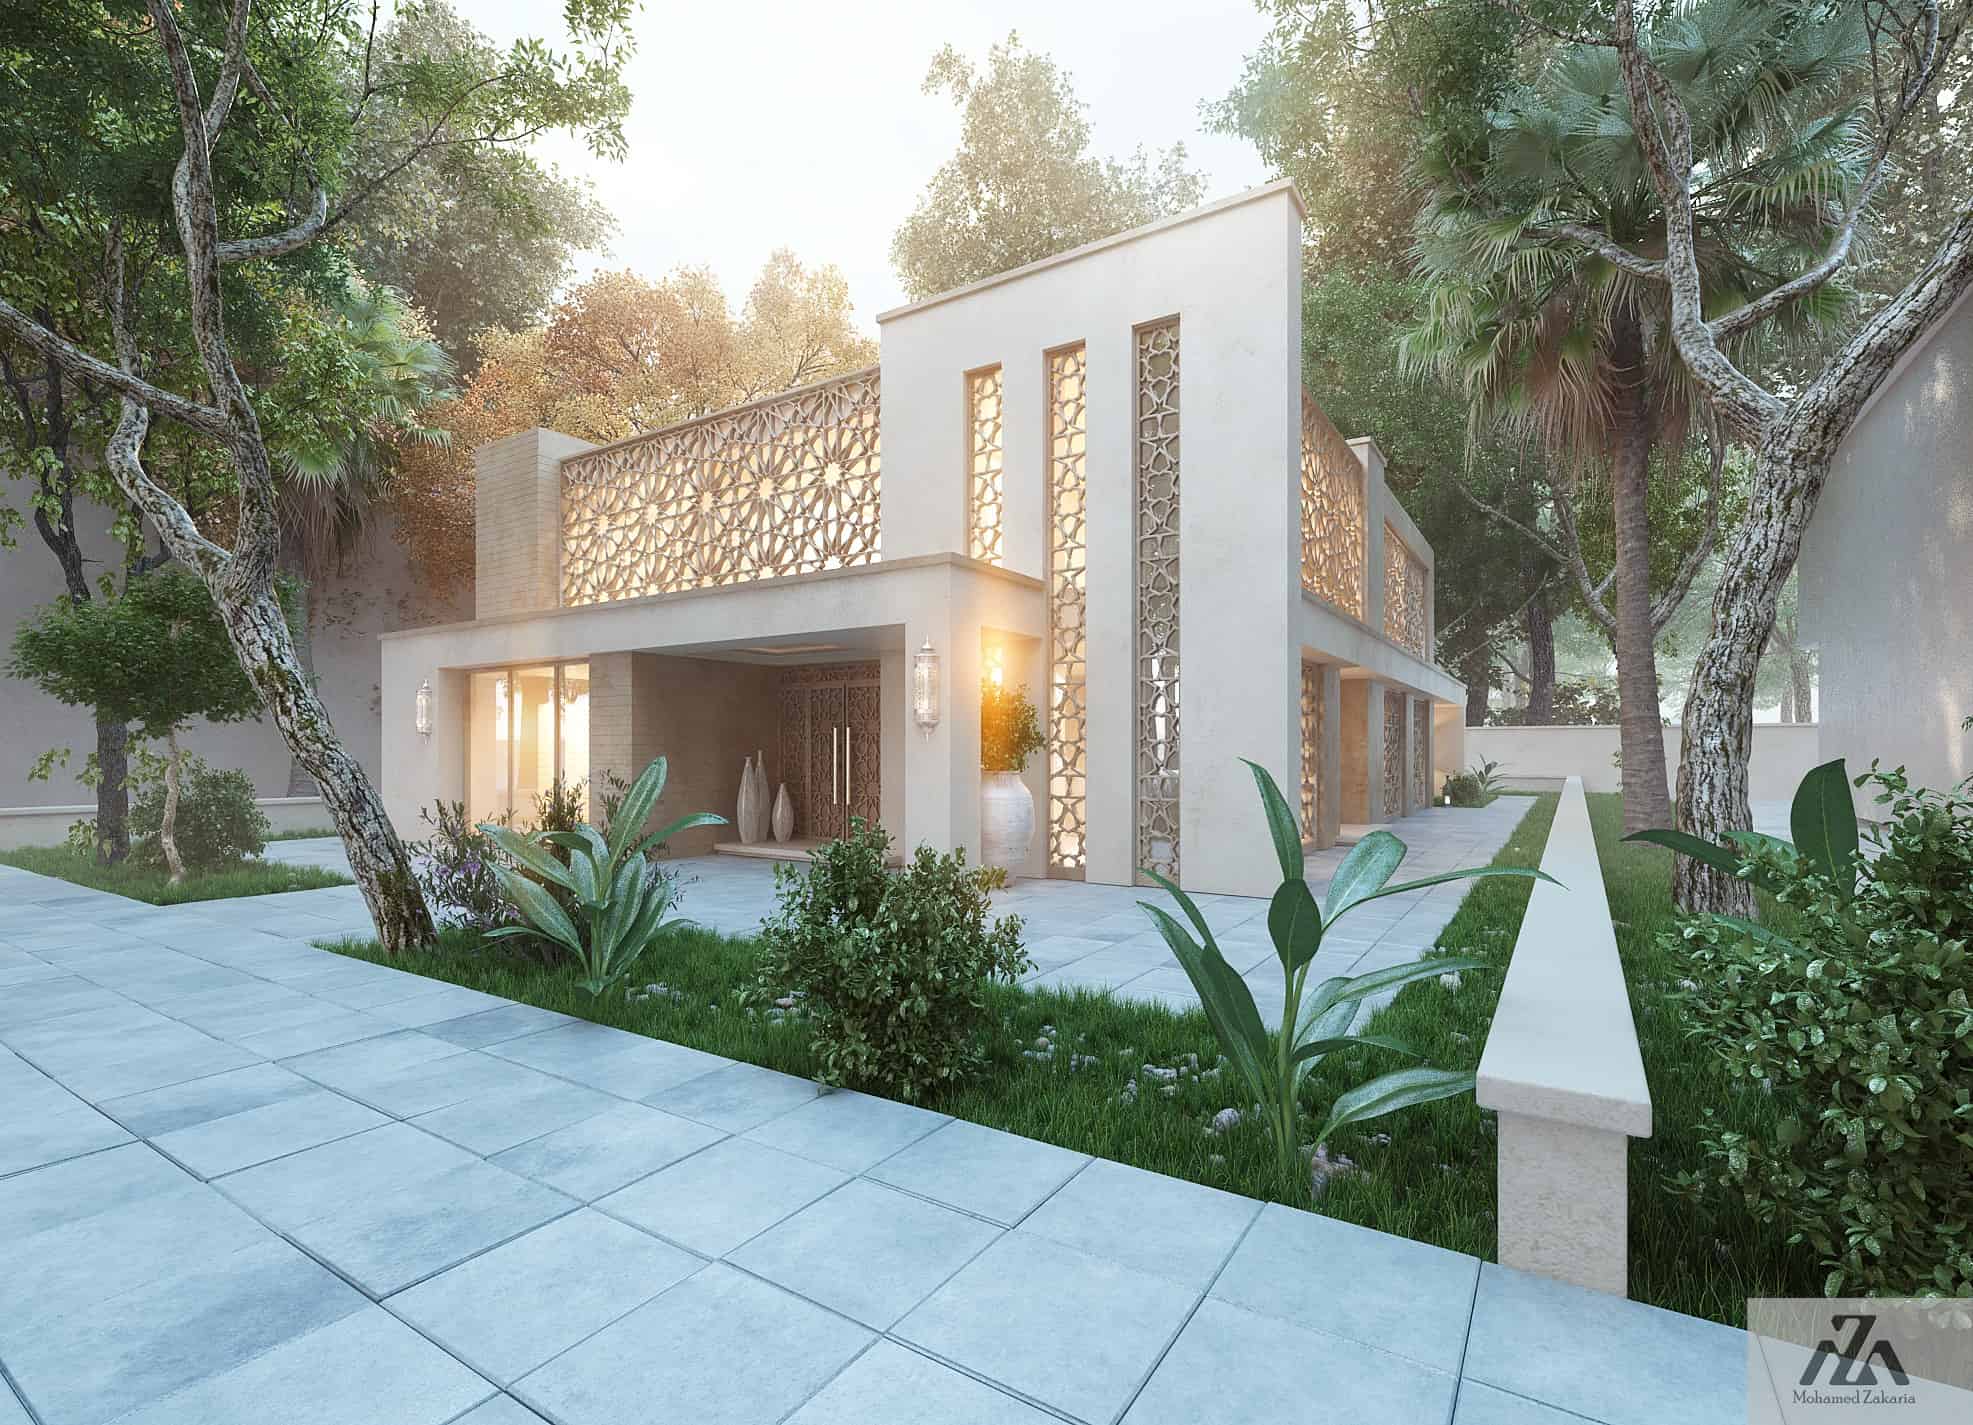 modern middle eastern architecture